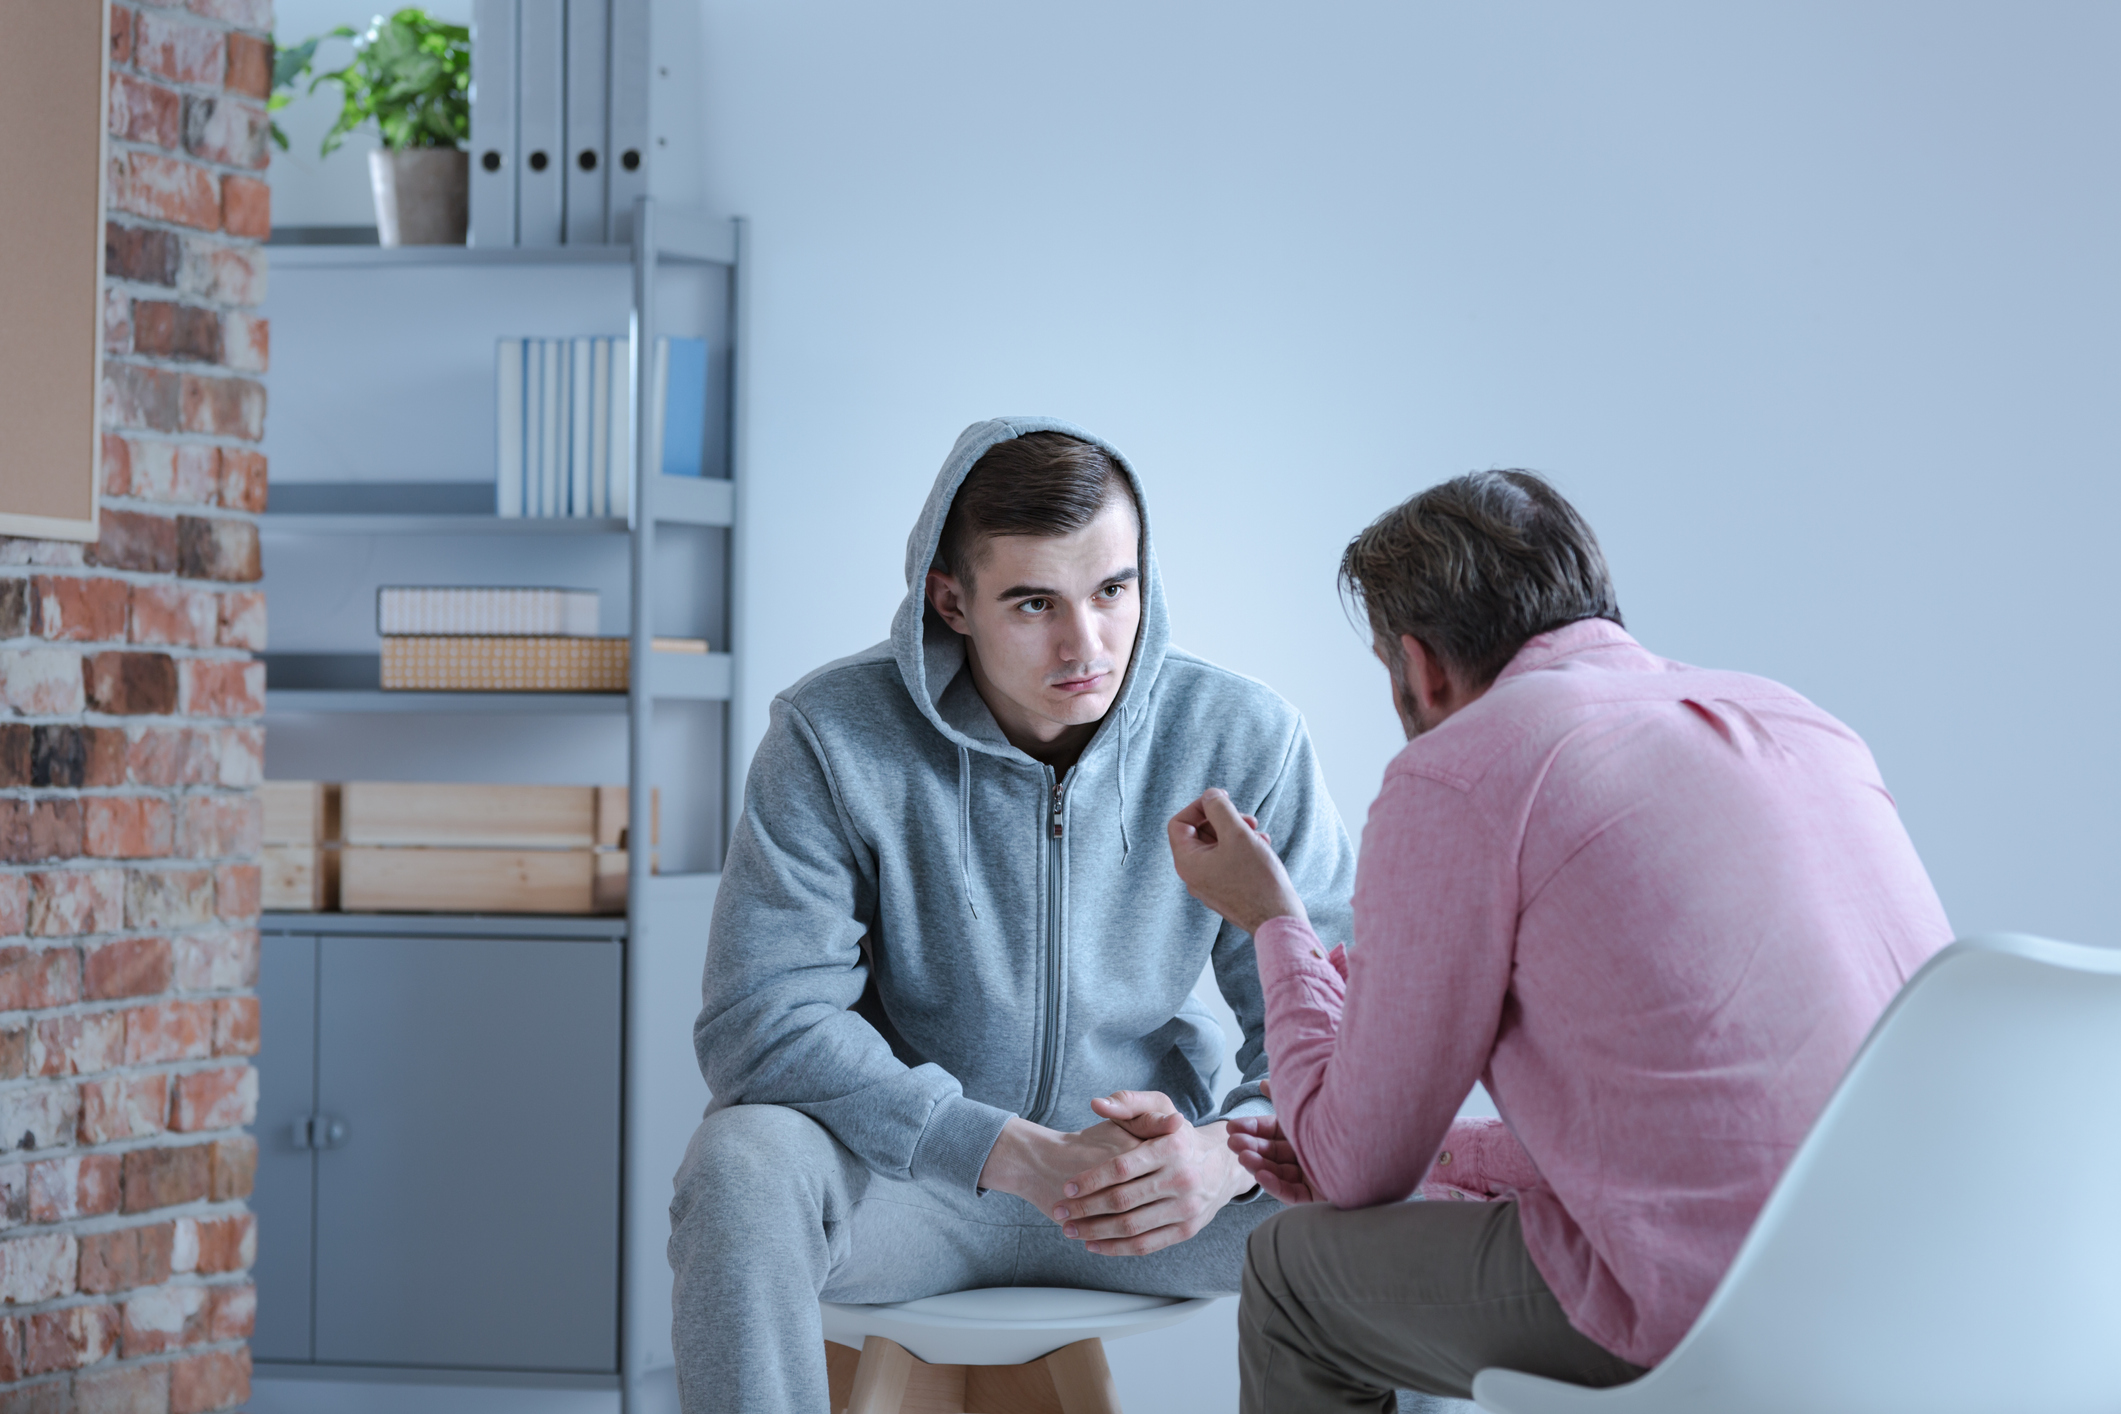 Young man undergoing outpatient rehab treatment with a therapist.